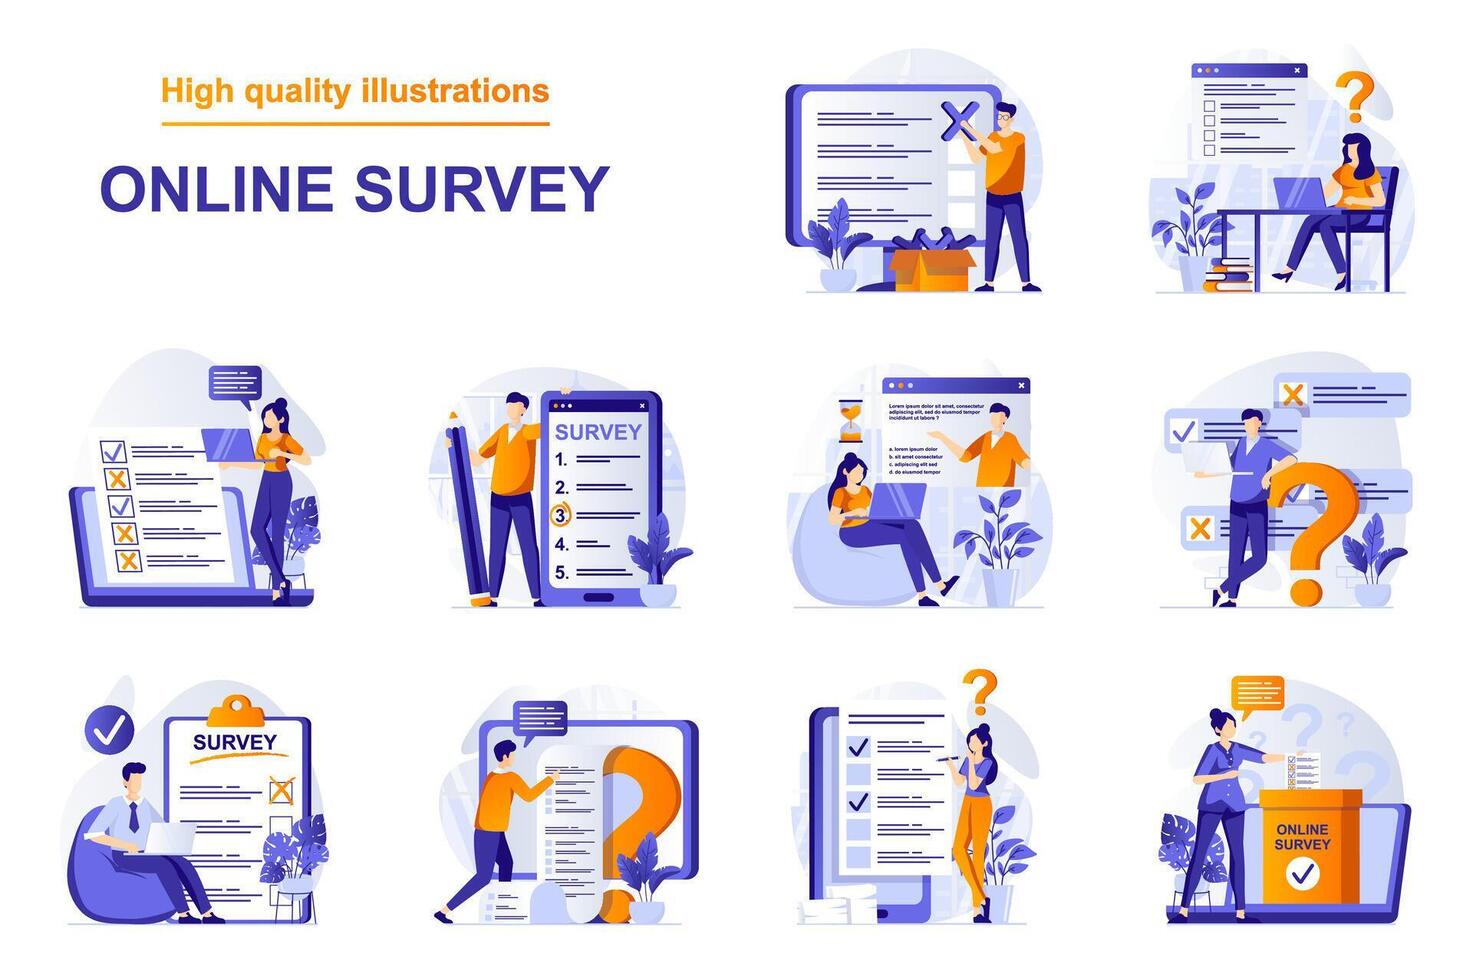 Online survey web concept with people scenes set in flat style. Bundle of online testing, examination in mobile app, answering in digital form, feedback. illustration with character design vector